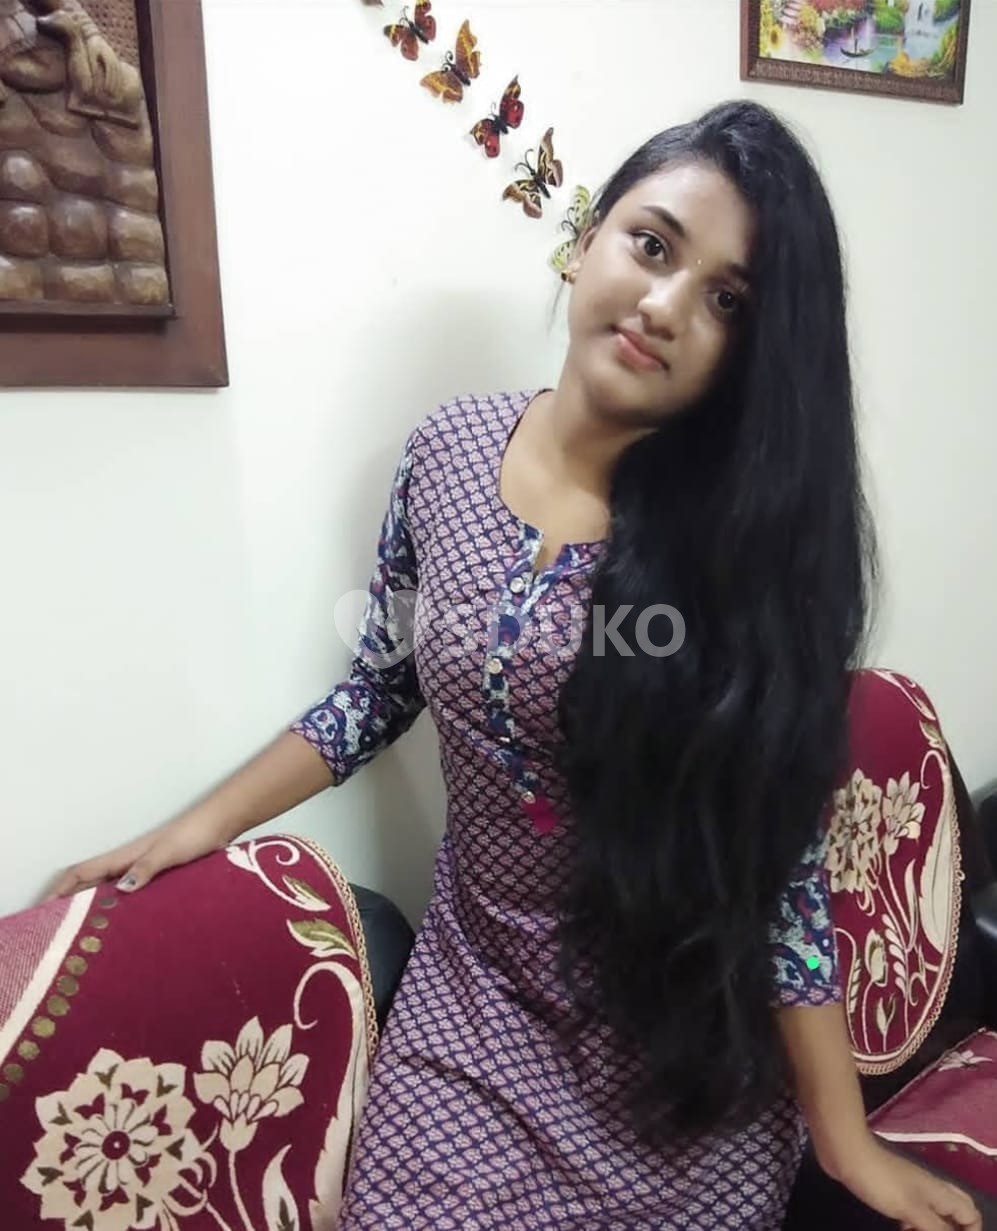 KORAMANGALA 💯 % FULLY SATISFACTION AND DOORSTEP INCALL OUTCALL SERVICE AVAILABLE SAFE AND SECURE(